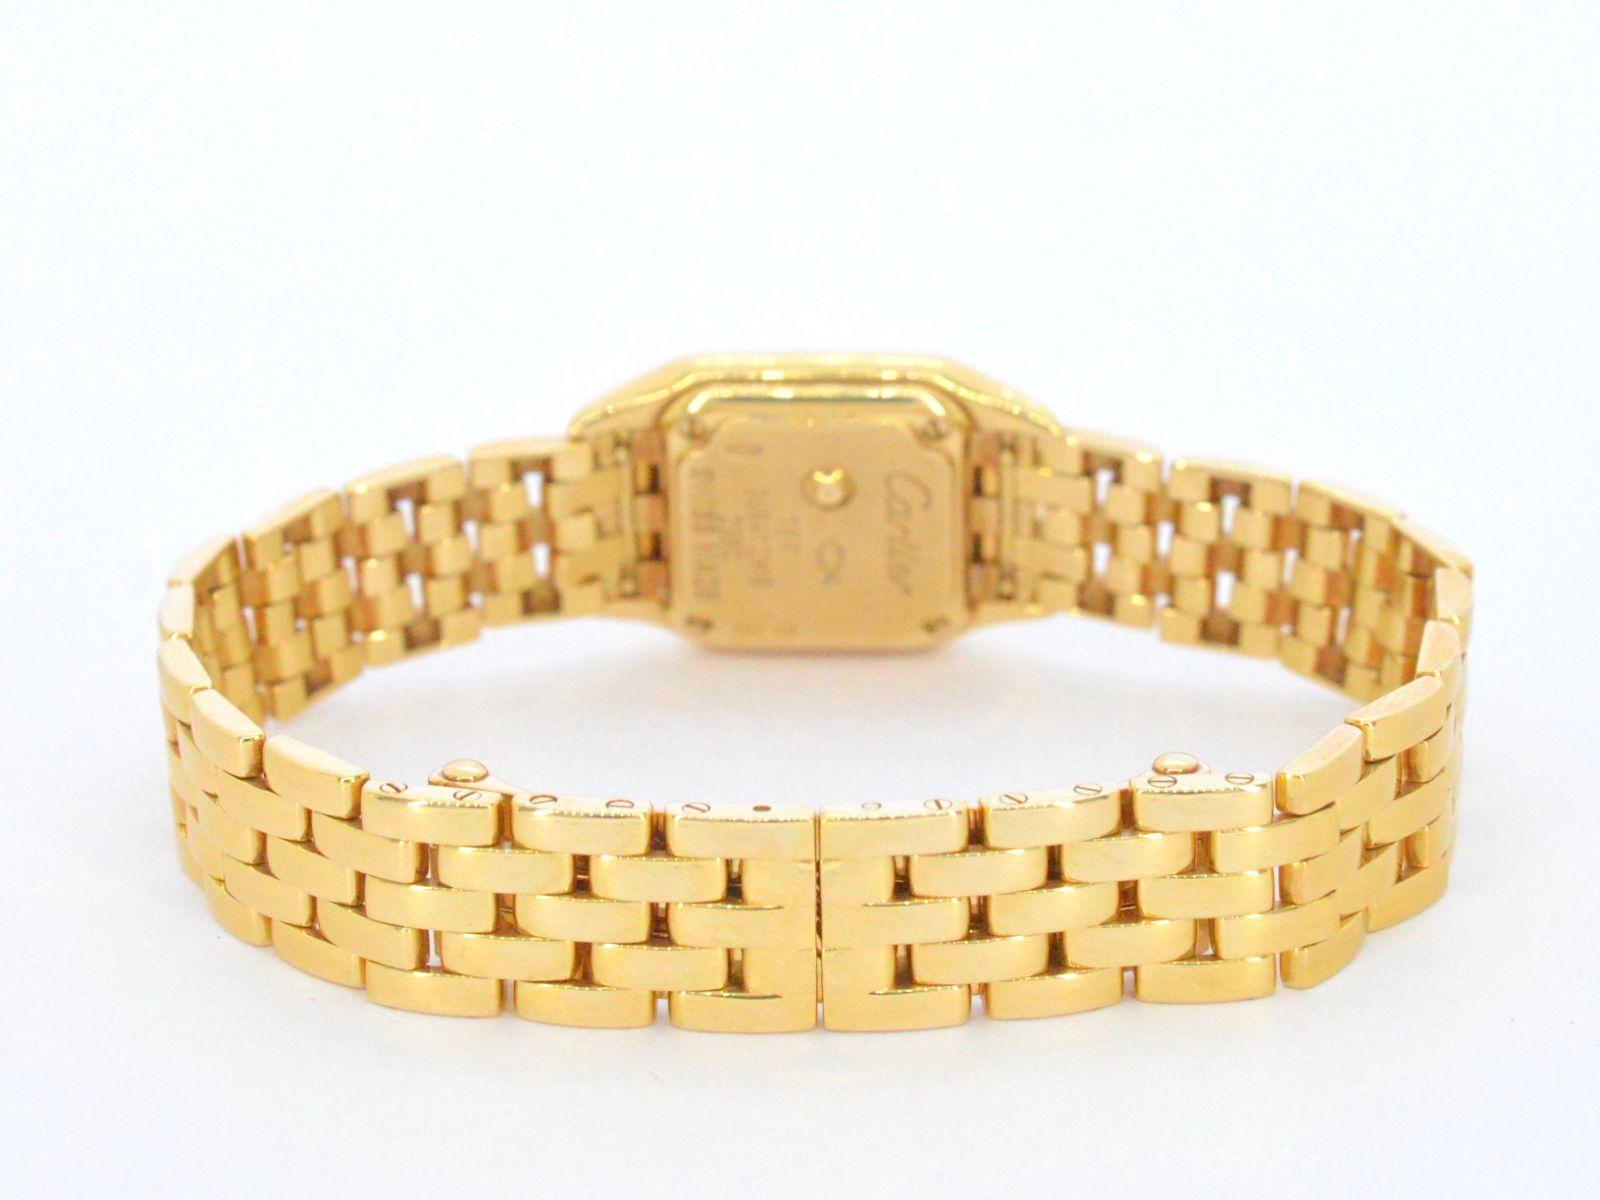 Contemporary Cartier, Panthere Mini, Golden Watch